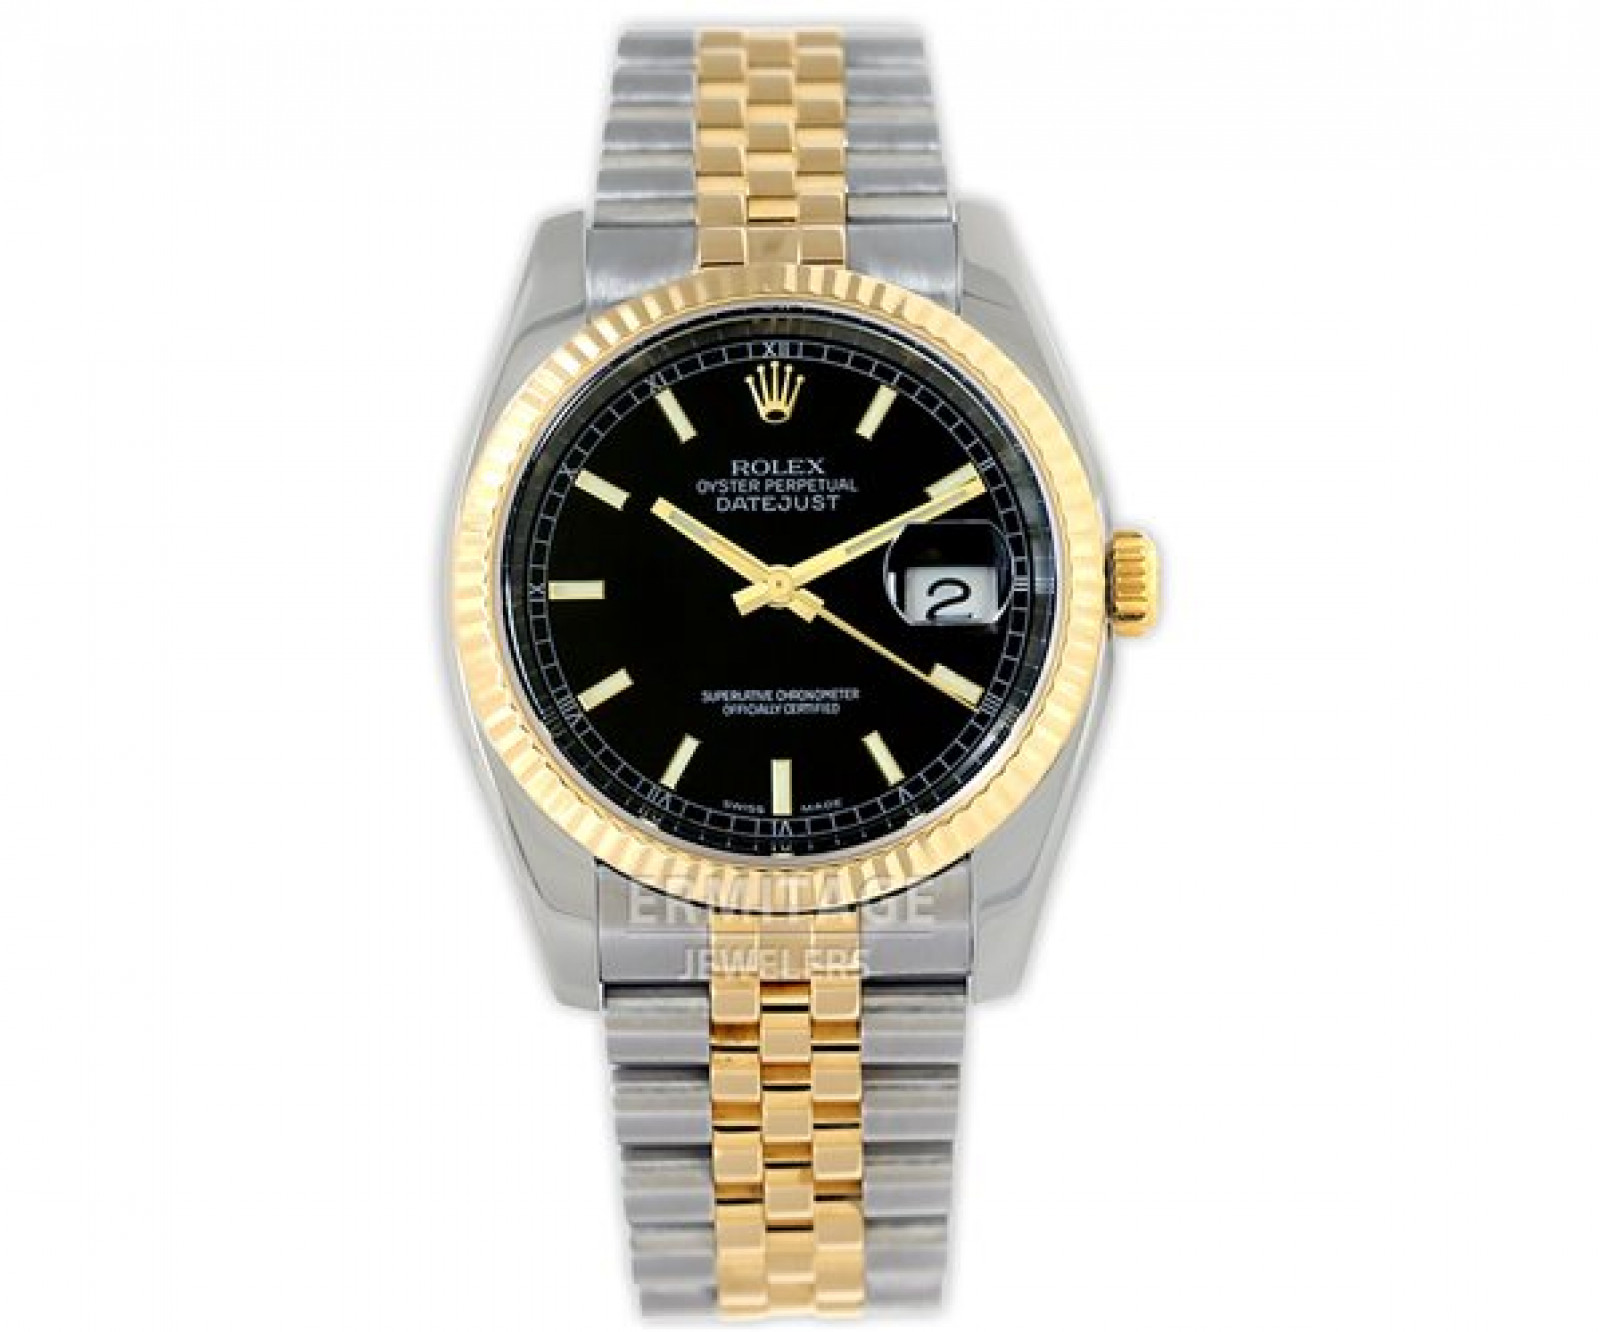 Pre-Owned Rolex Datejust 116233 Gold & Steel Year 2005